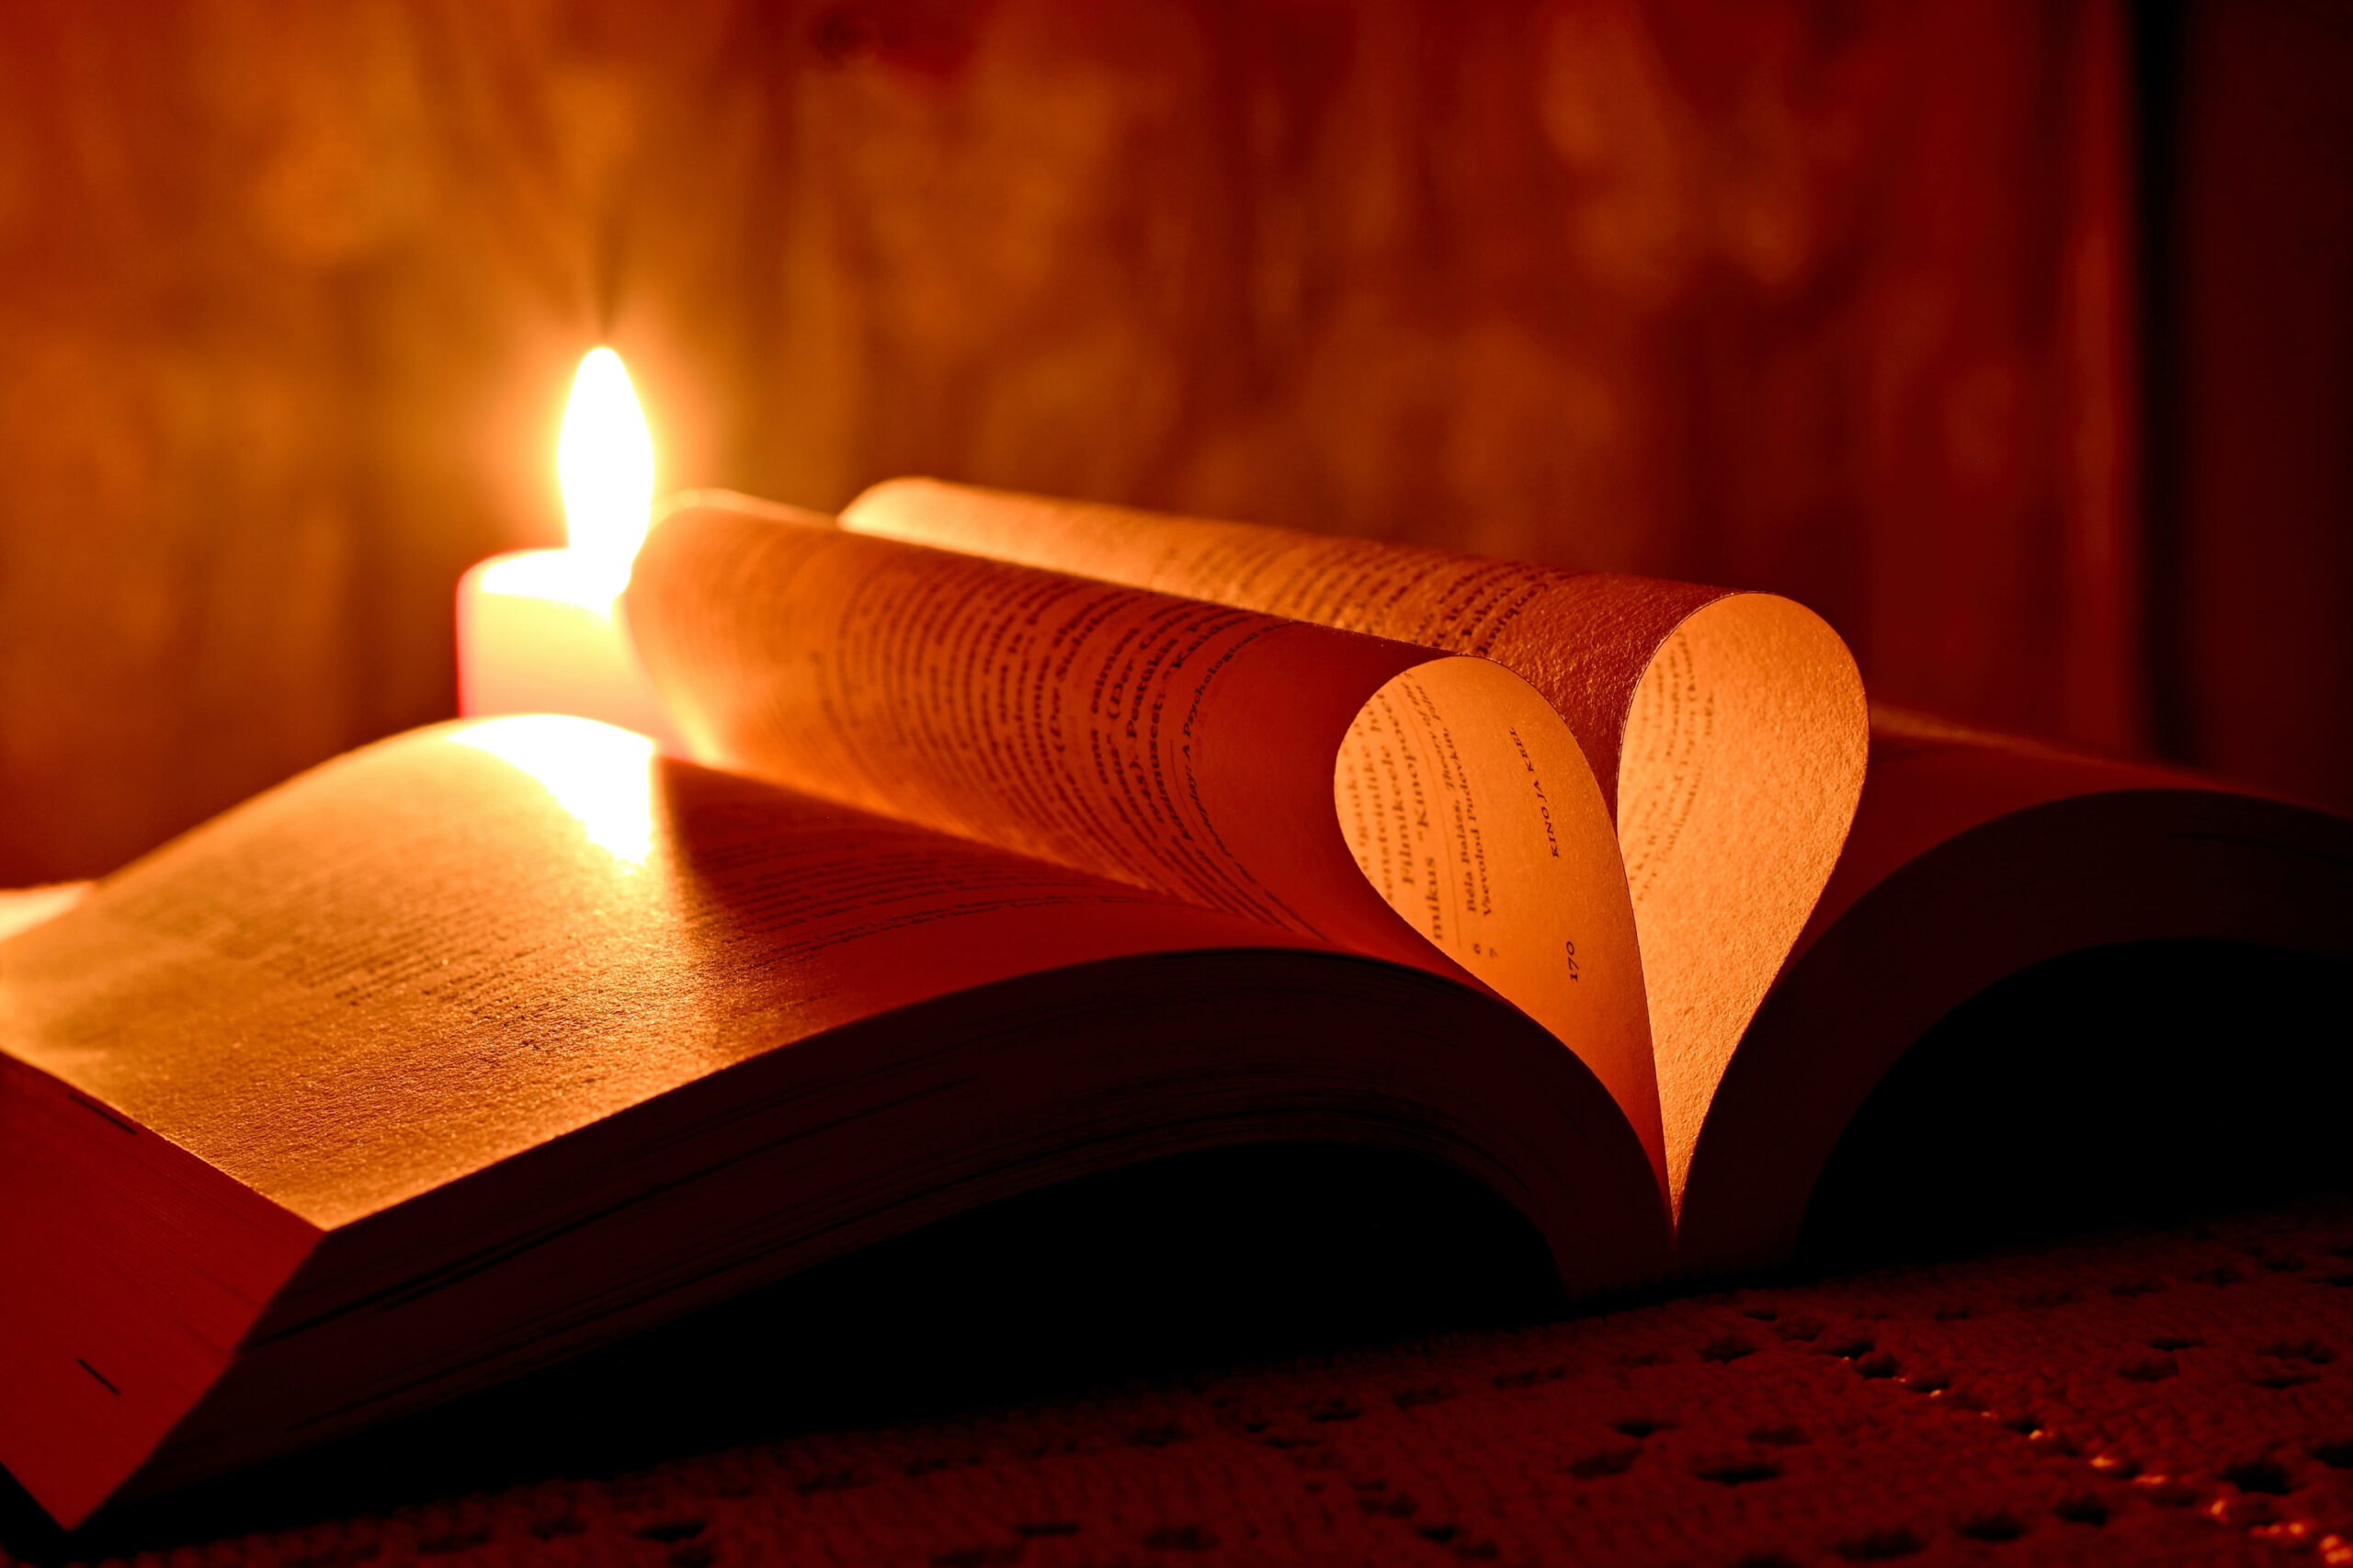 a burning candle beside a bible with pages folded over to make a heart shape